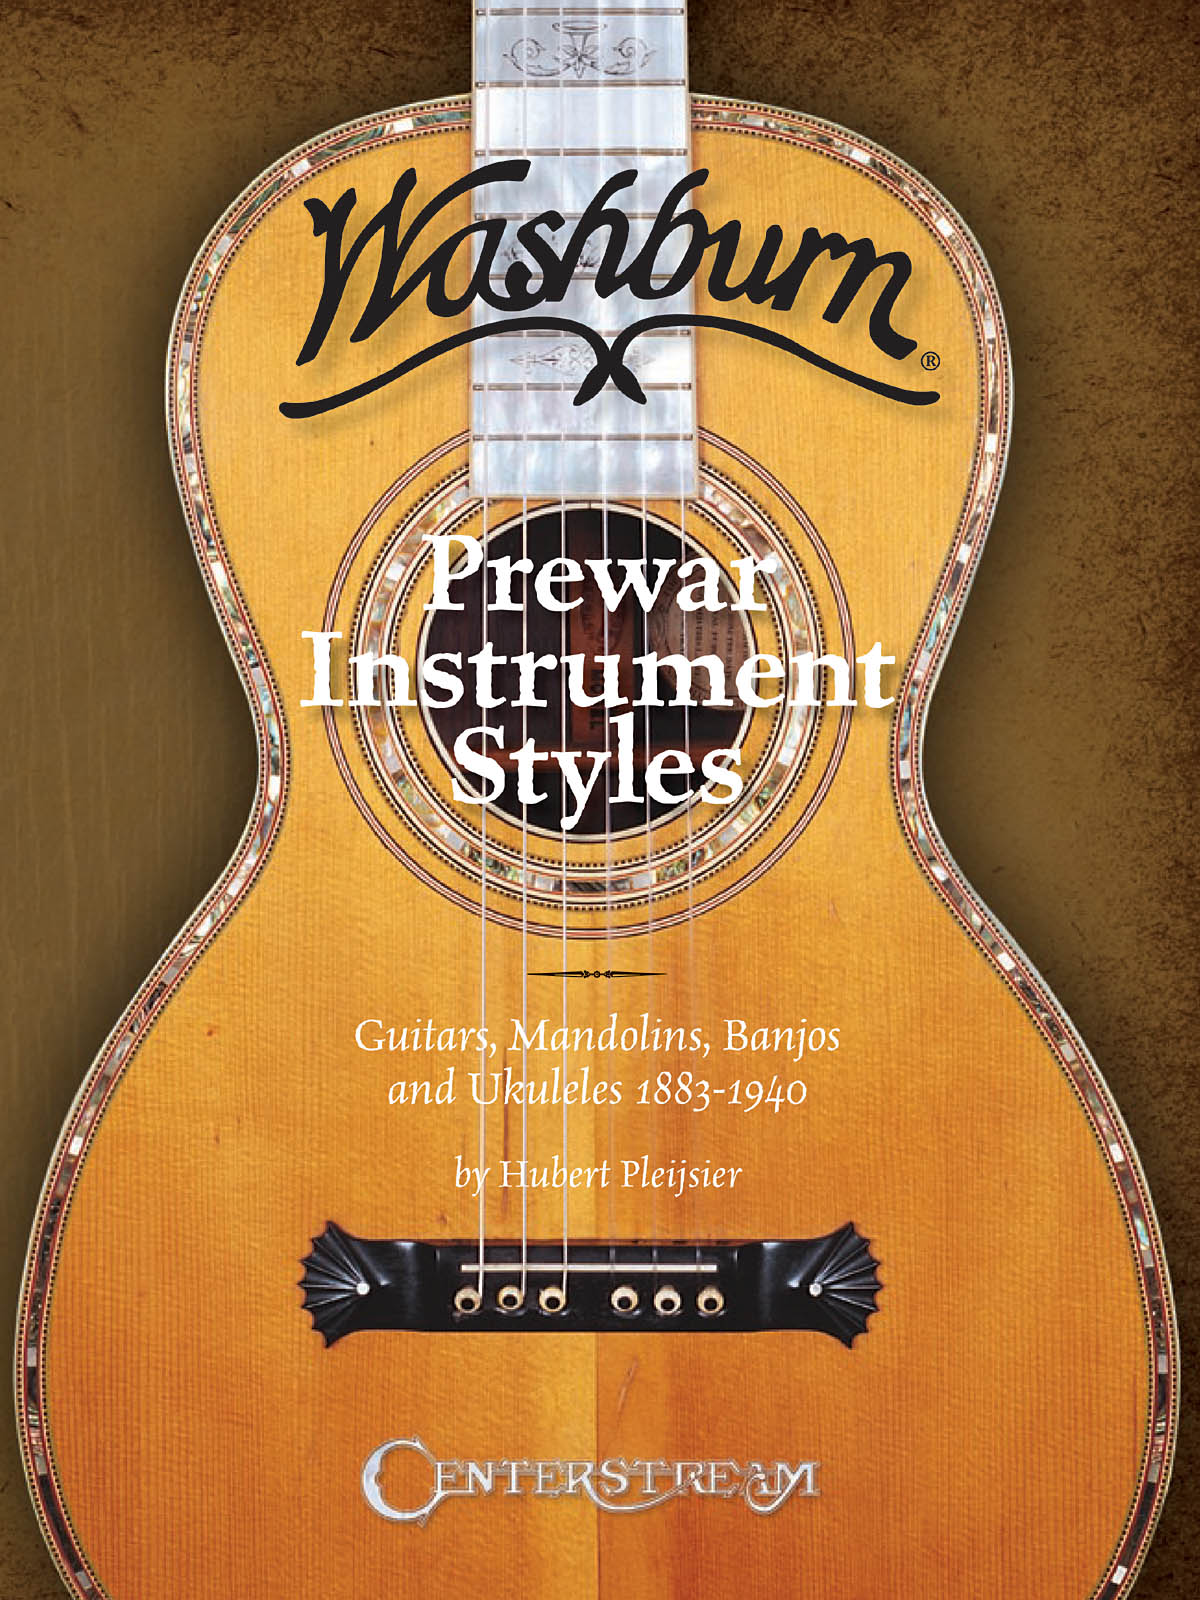 History of Washburn Guitar: Reference Books